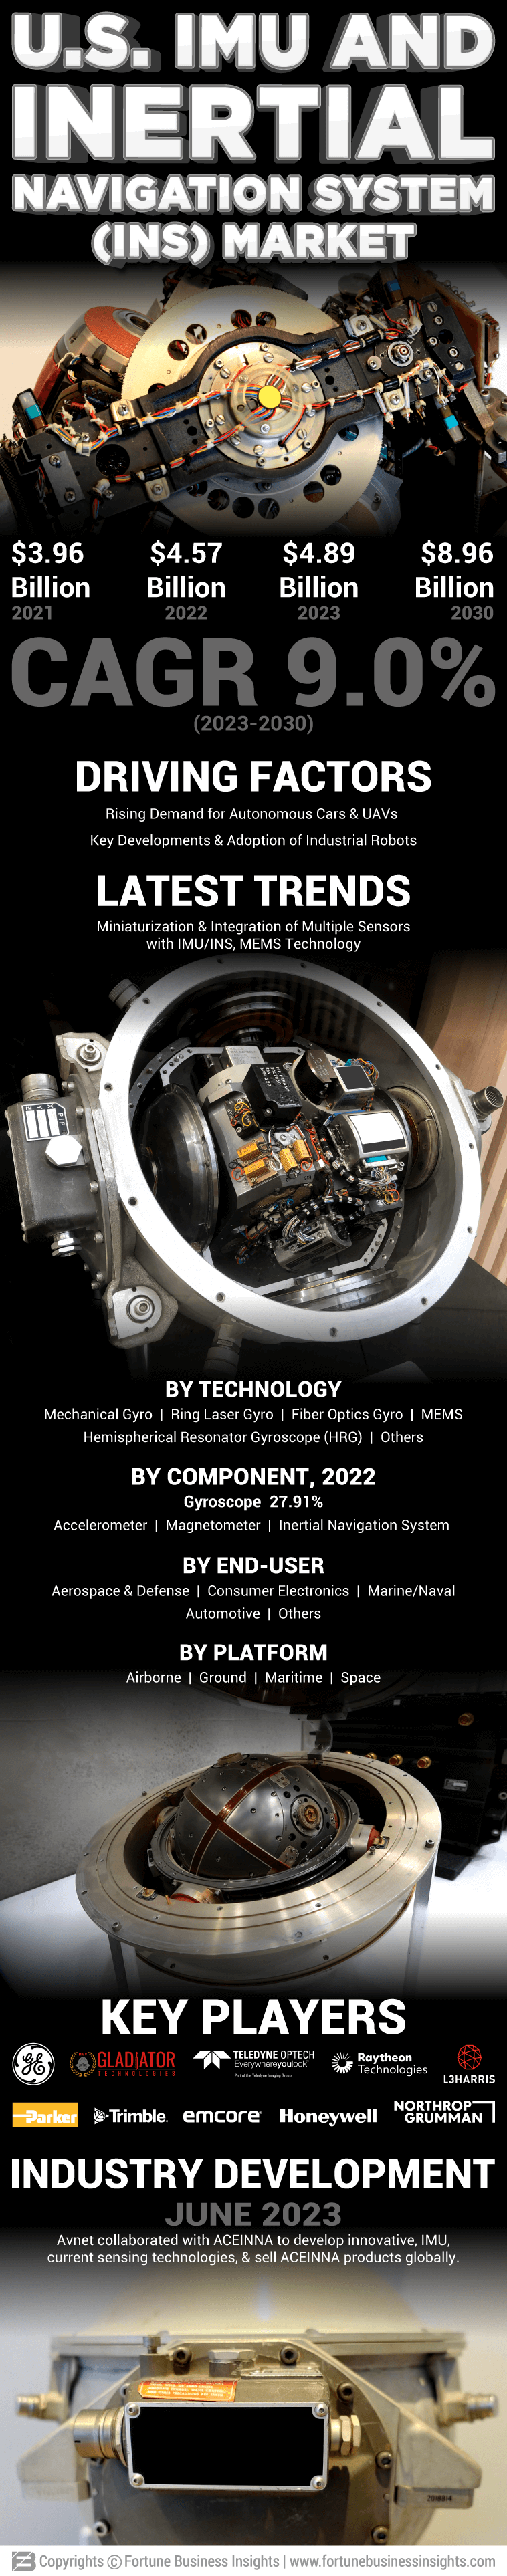 U.S. IMU and Inertial Navigation System (INS) Market